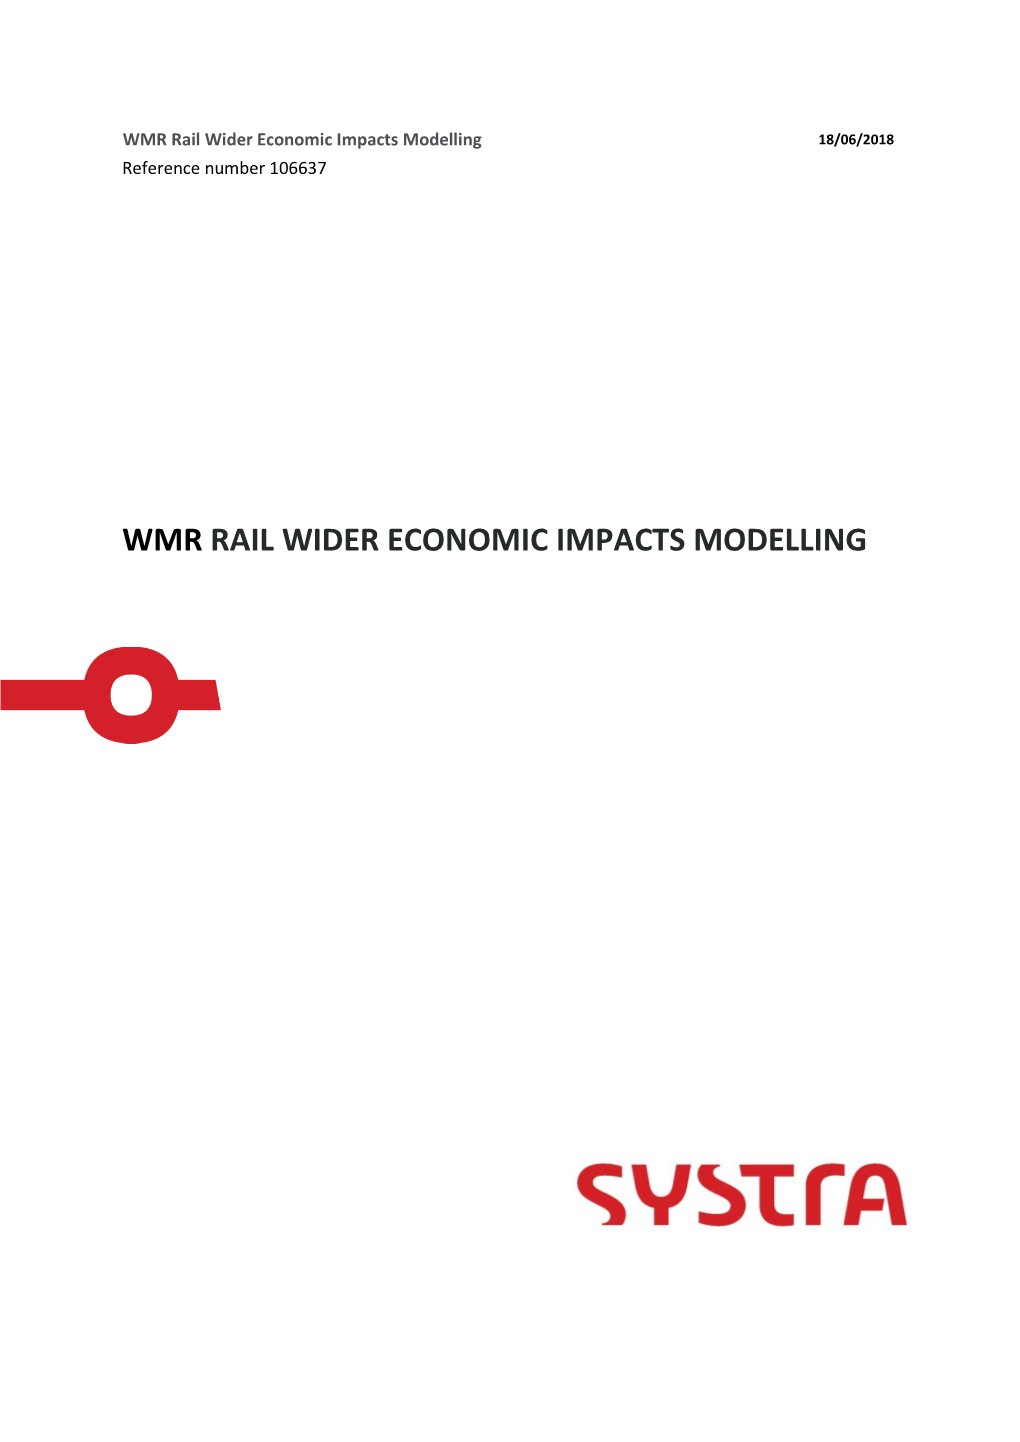 WMR Rail Wider Economic Impacts Modelling 18/06/2018 Reference Number 106637